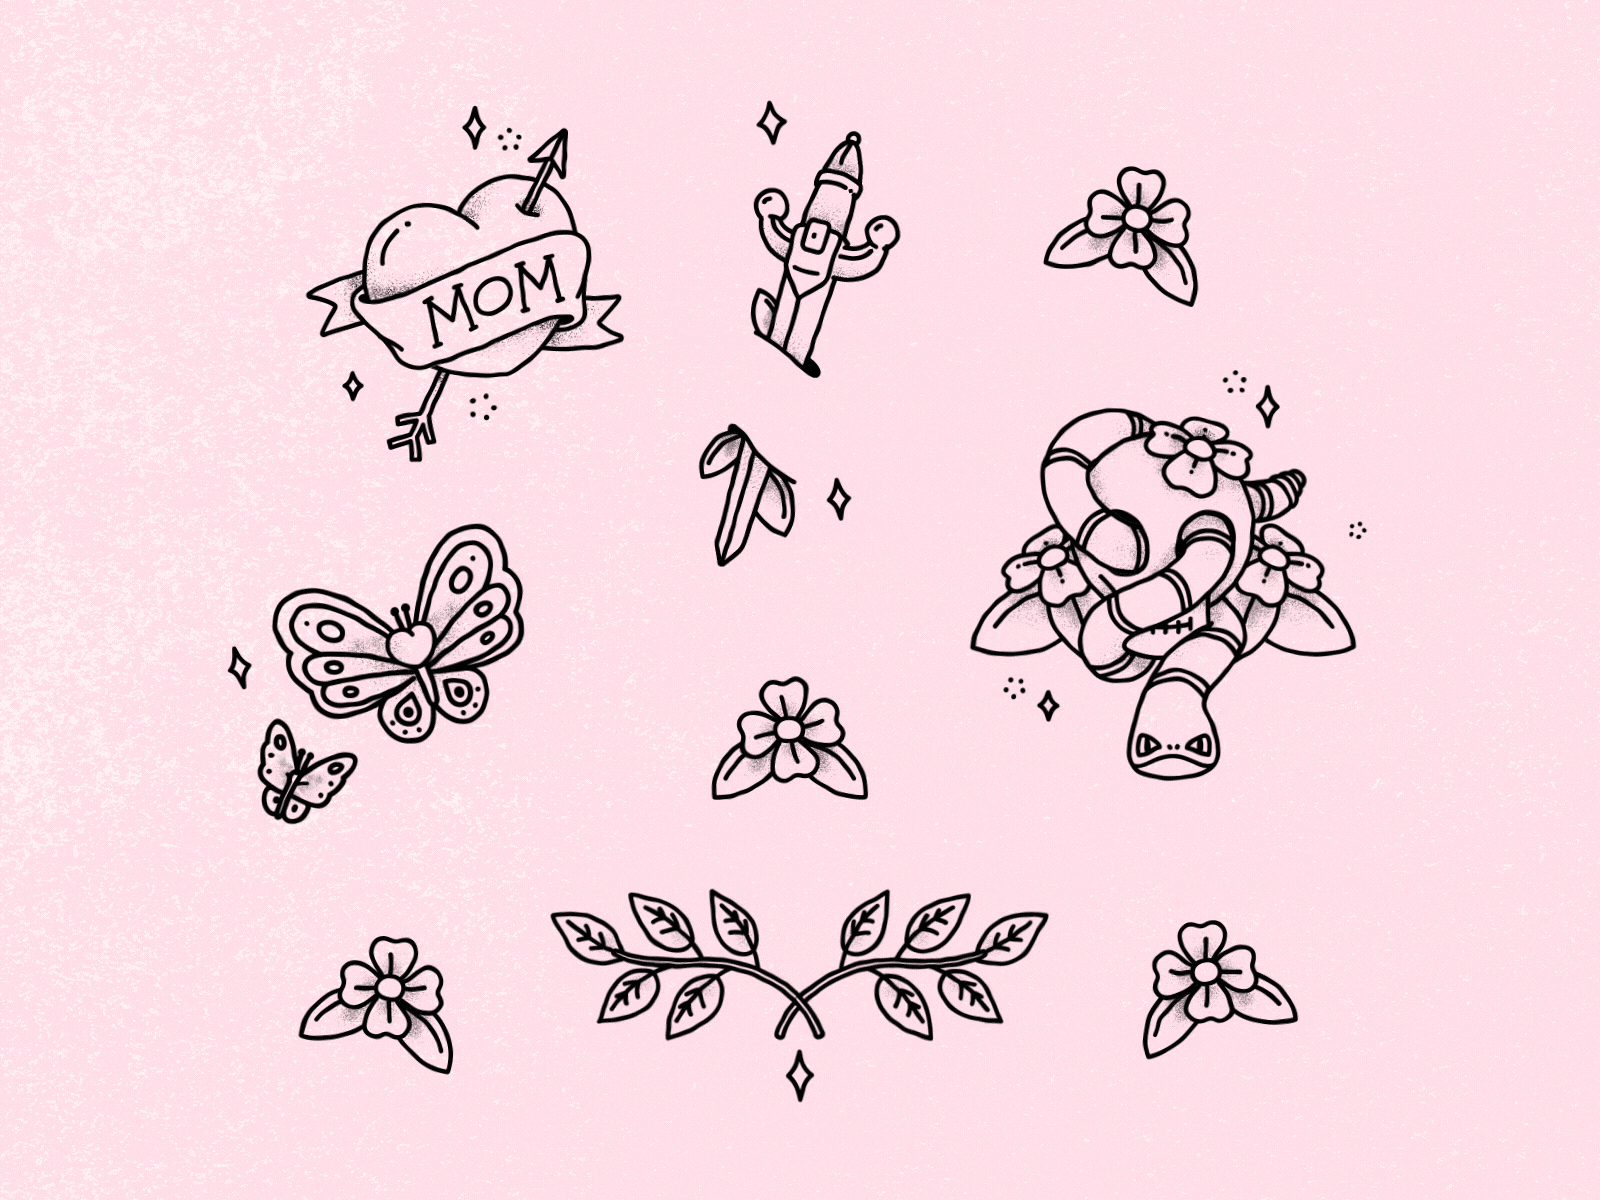 Tattoo Stickers for Instagram butterfly flowers grain instagram stickers knife skull snake stickers tattoo traditional tattoo